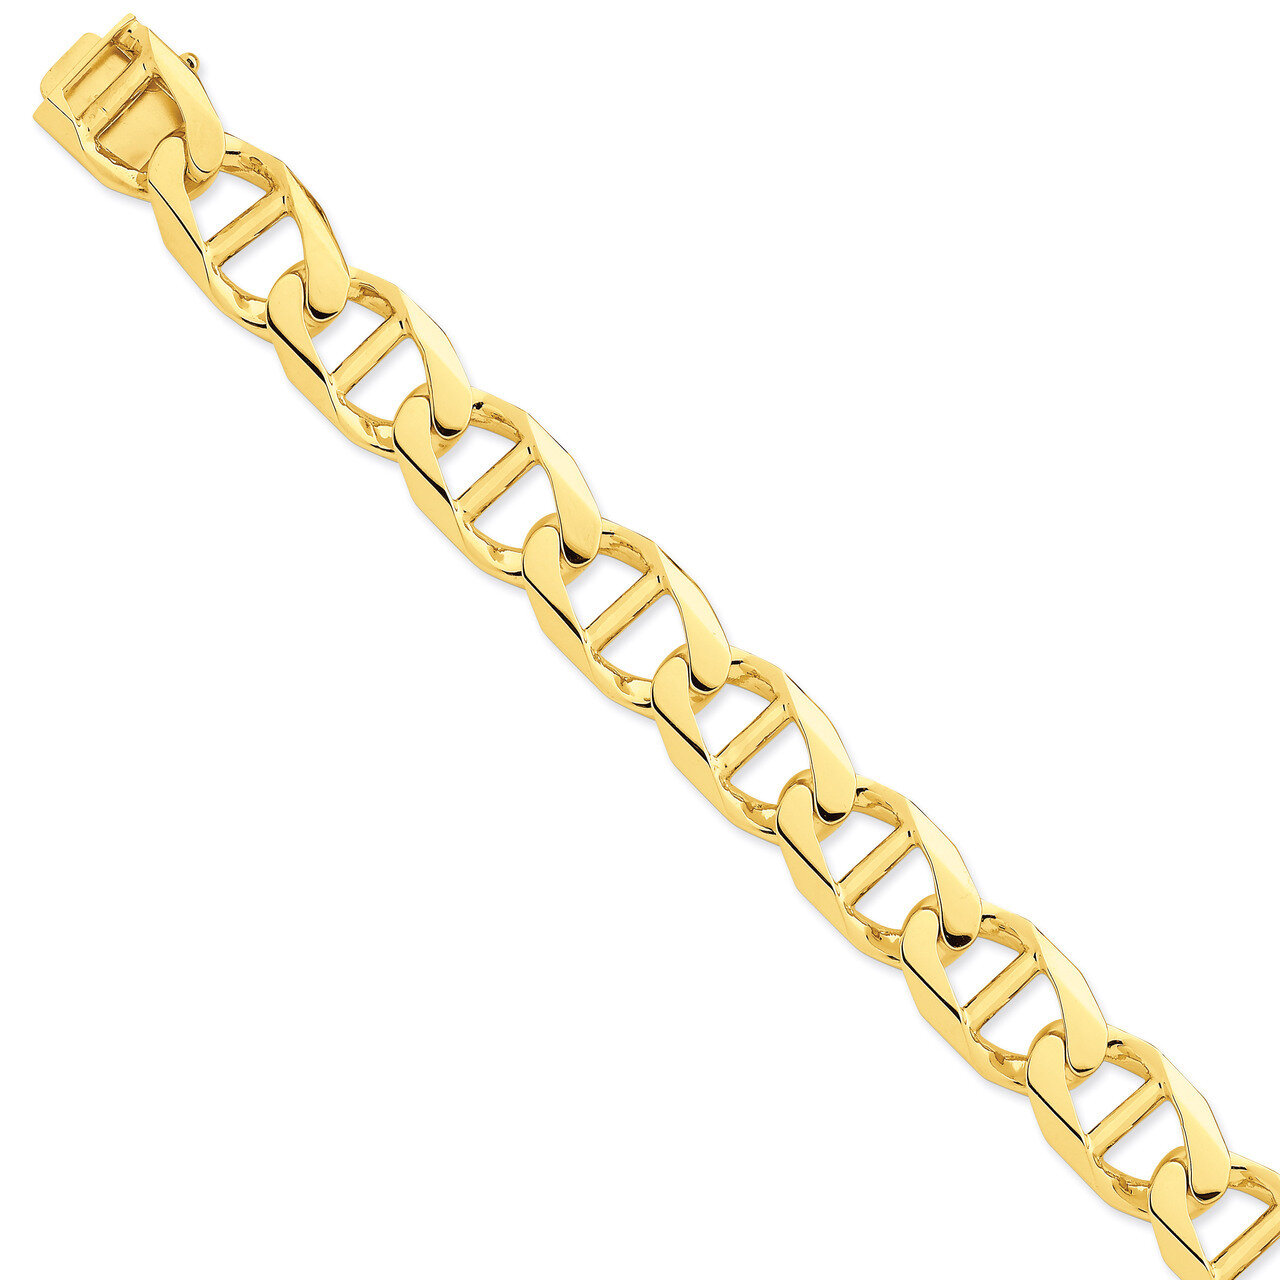 15mm Hand-Polished Anchor Link Chain 22 Inch 14k Gold LK104-22